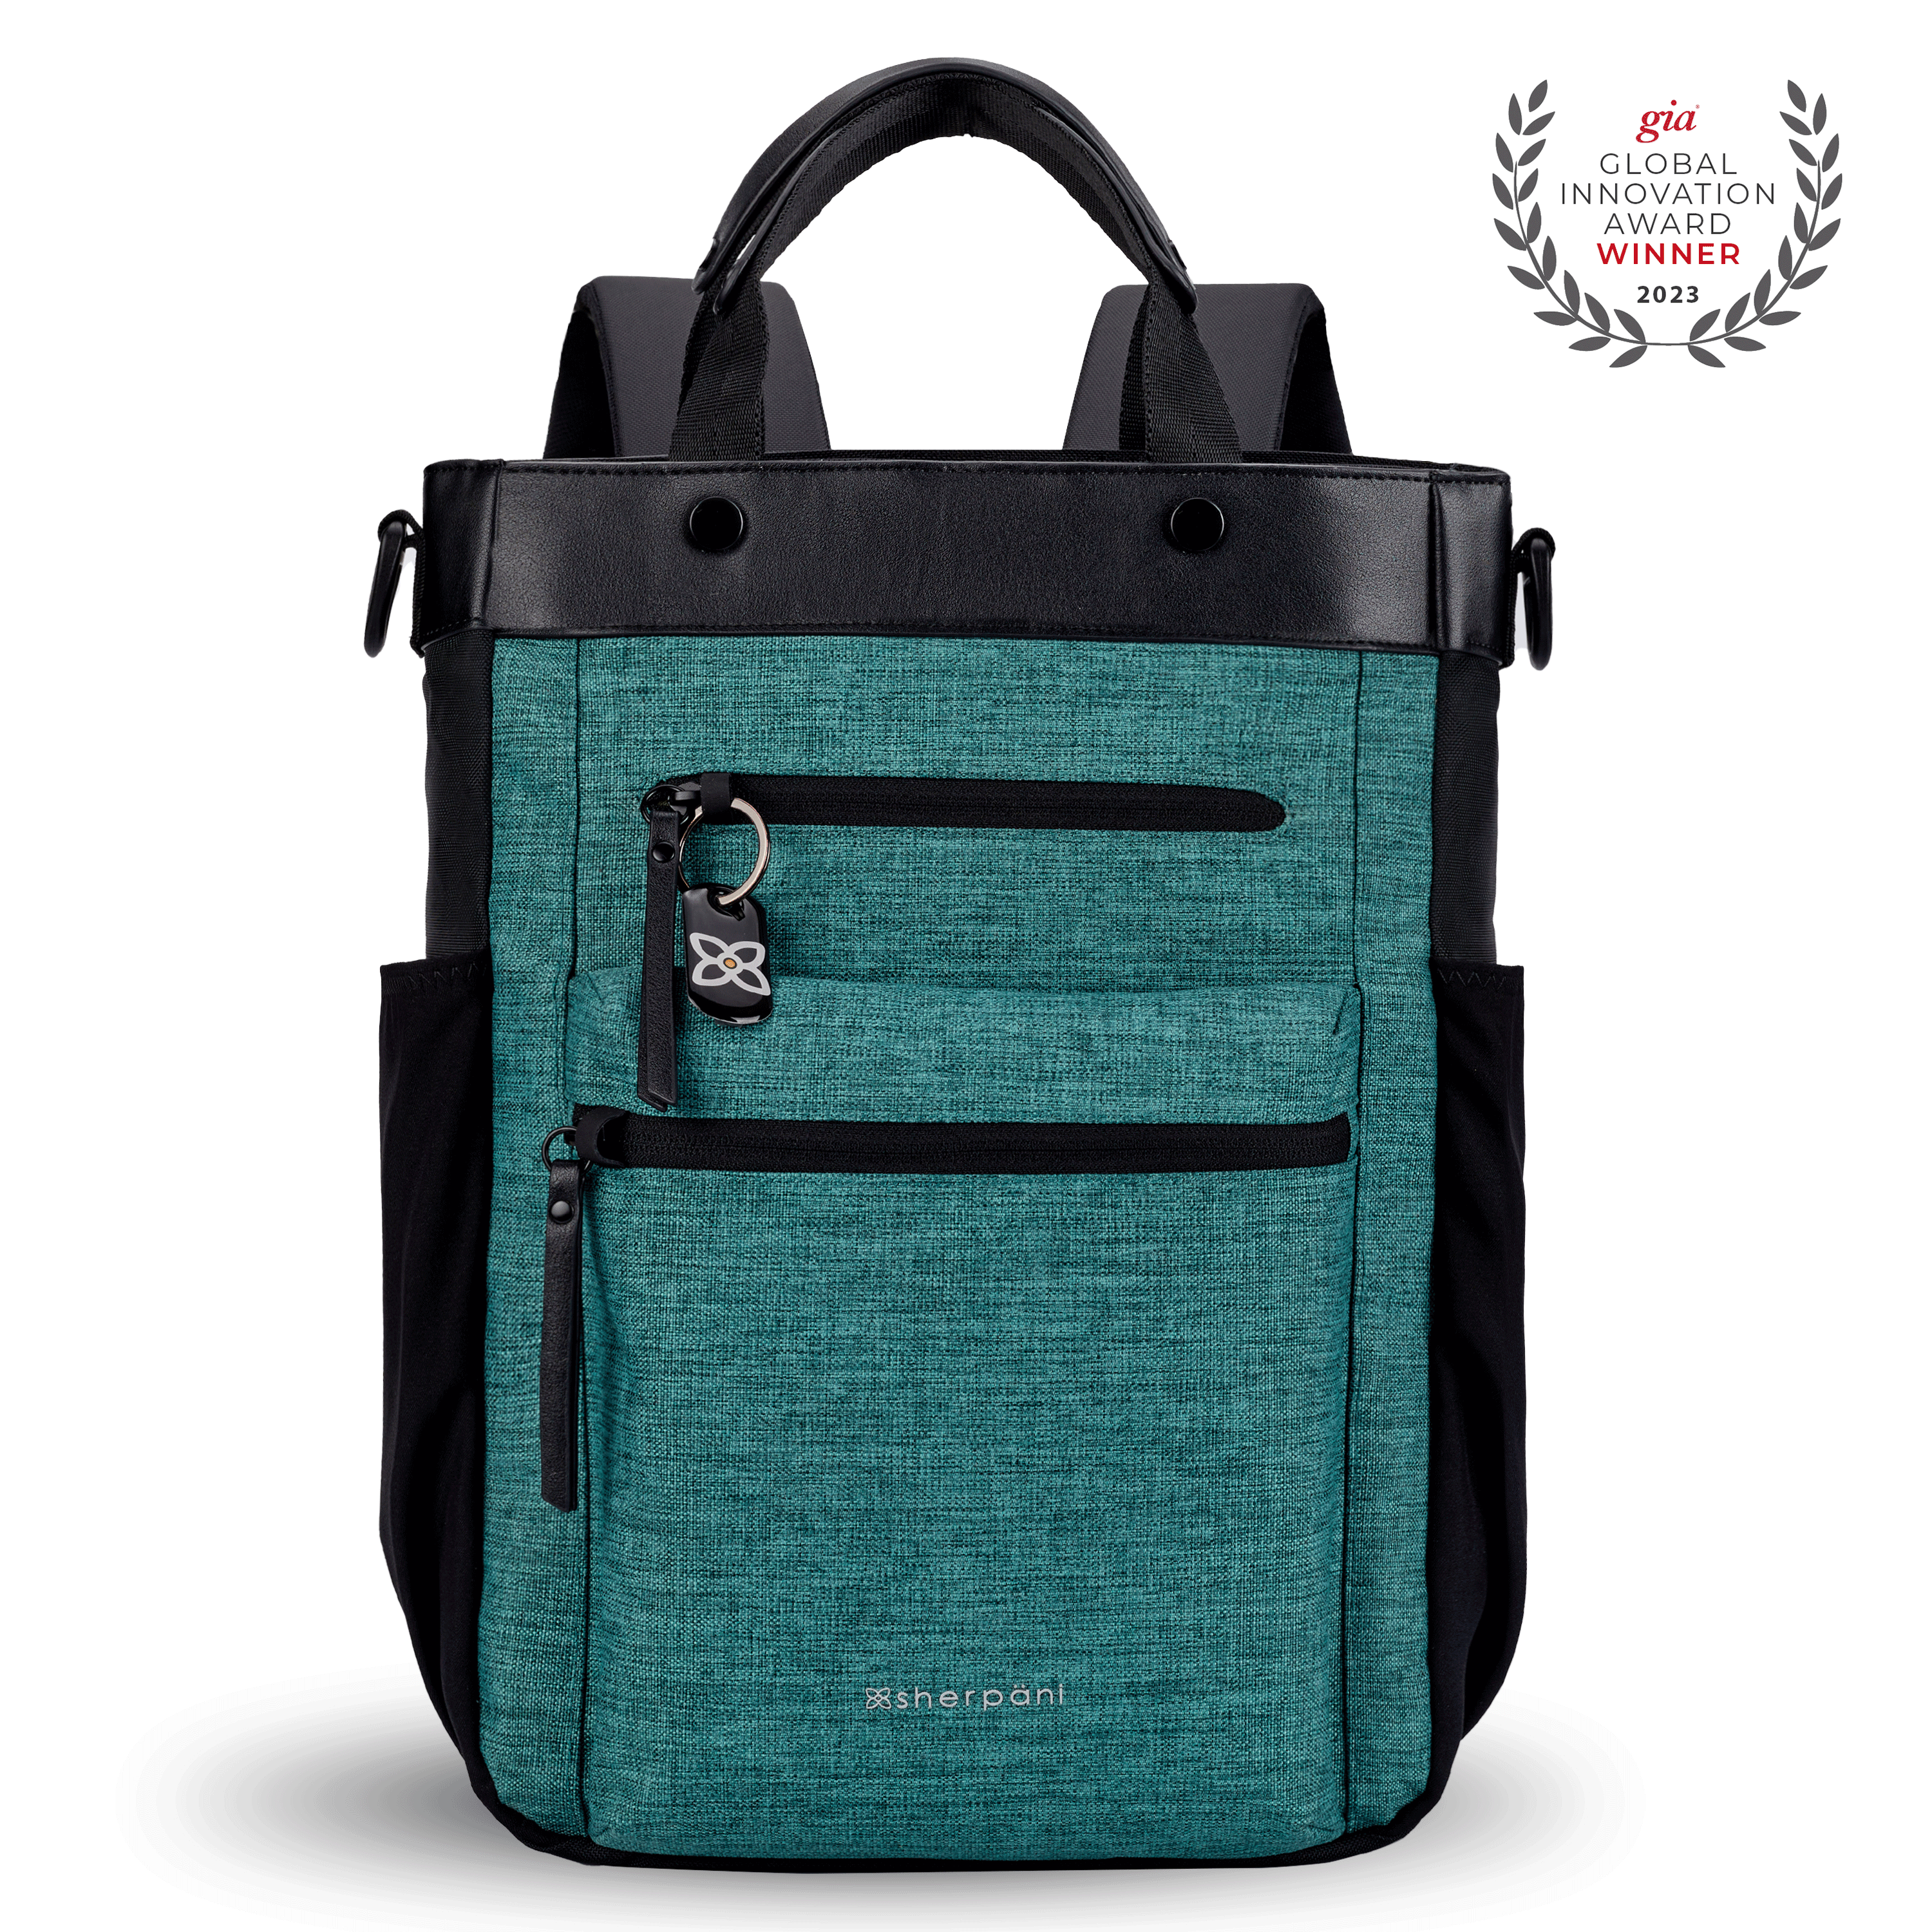 Flat front view of Sherpani&#39;s Anti-Theft bag, the Soleil AT in Teal, with vegan leather accents in black. On the front are two locking zipper compartments, a ReturnMe tag is clipped to the upper one. Two elastic water bottle holders sit on either side of the bag. It has padded backpack straps, short tote handles, and a place to attach a crossbody strap.